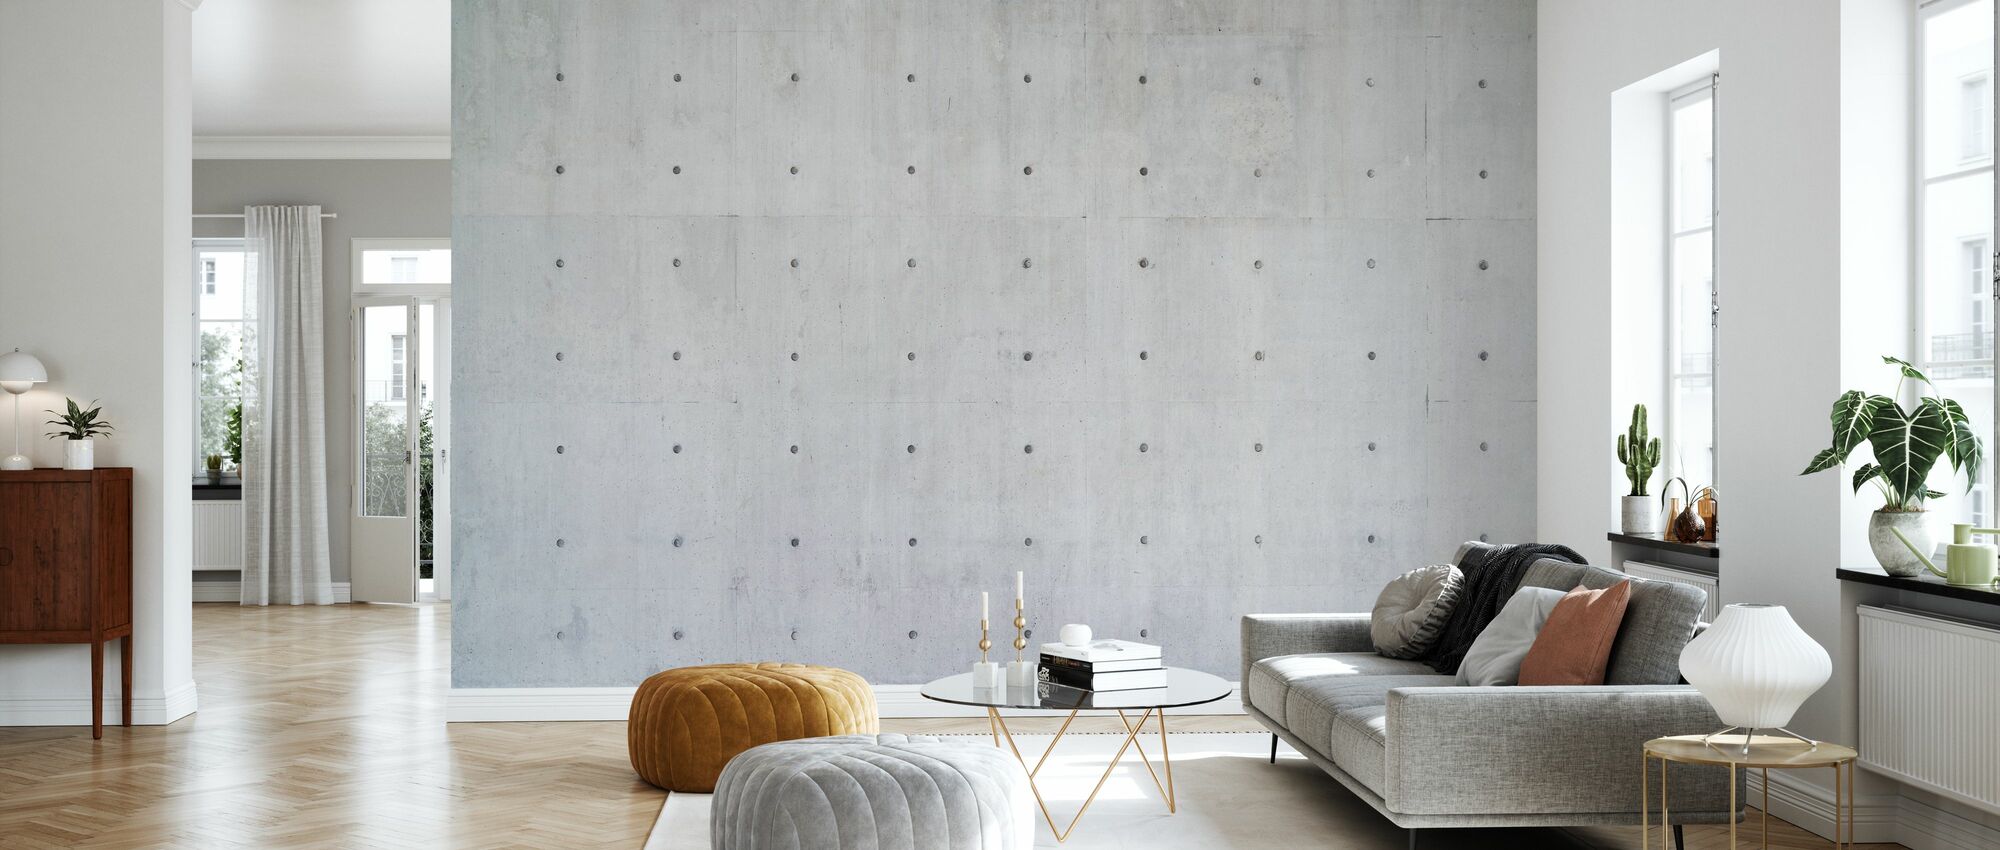 Concrete Block Wall – made-to-measure wall mural – Photowall